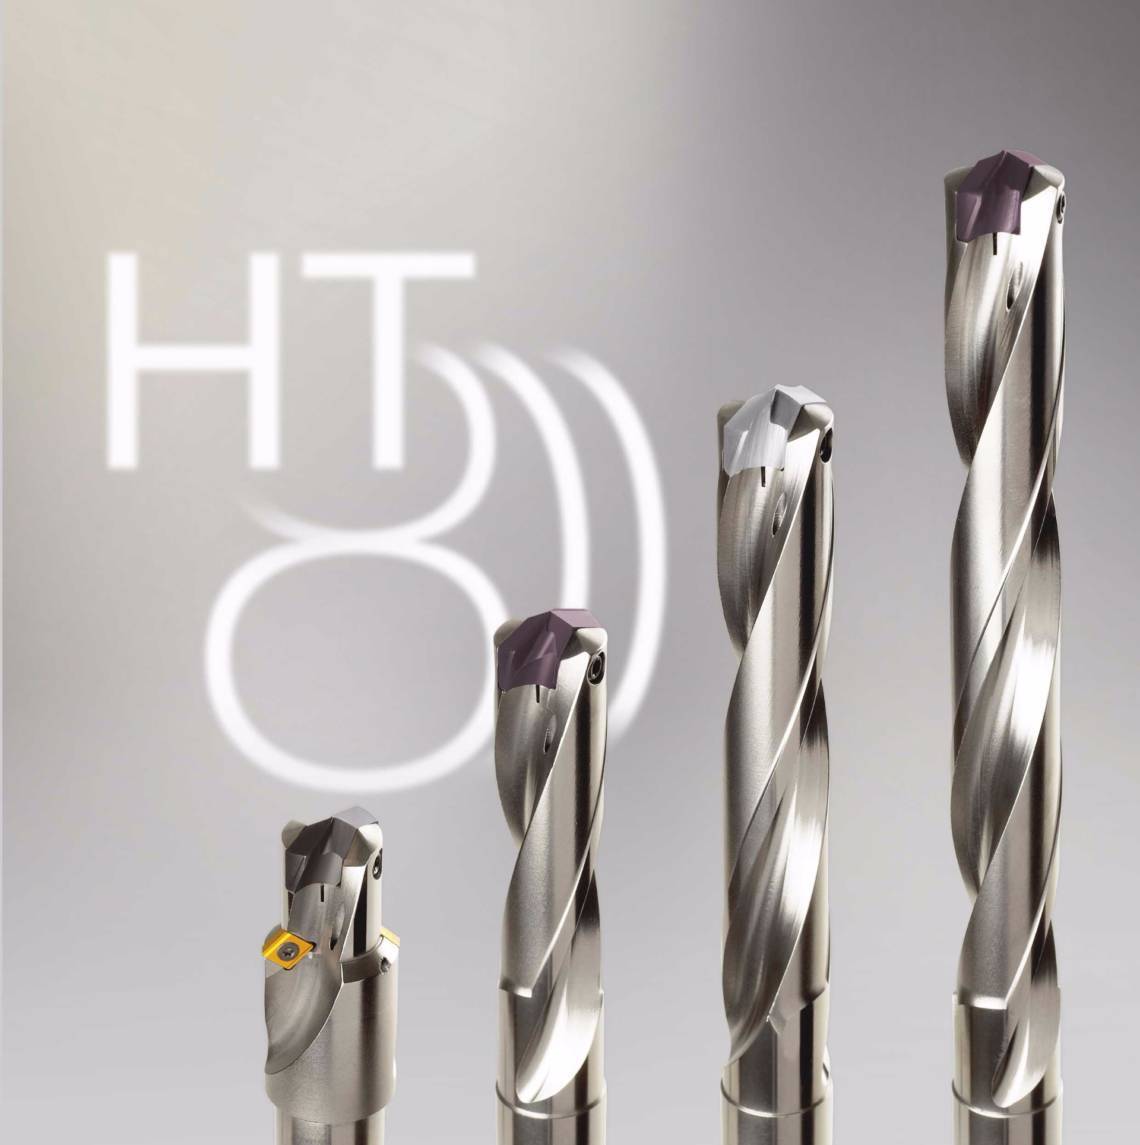 Guhring HSS Drill Bits - with solid carbide inserts